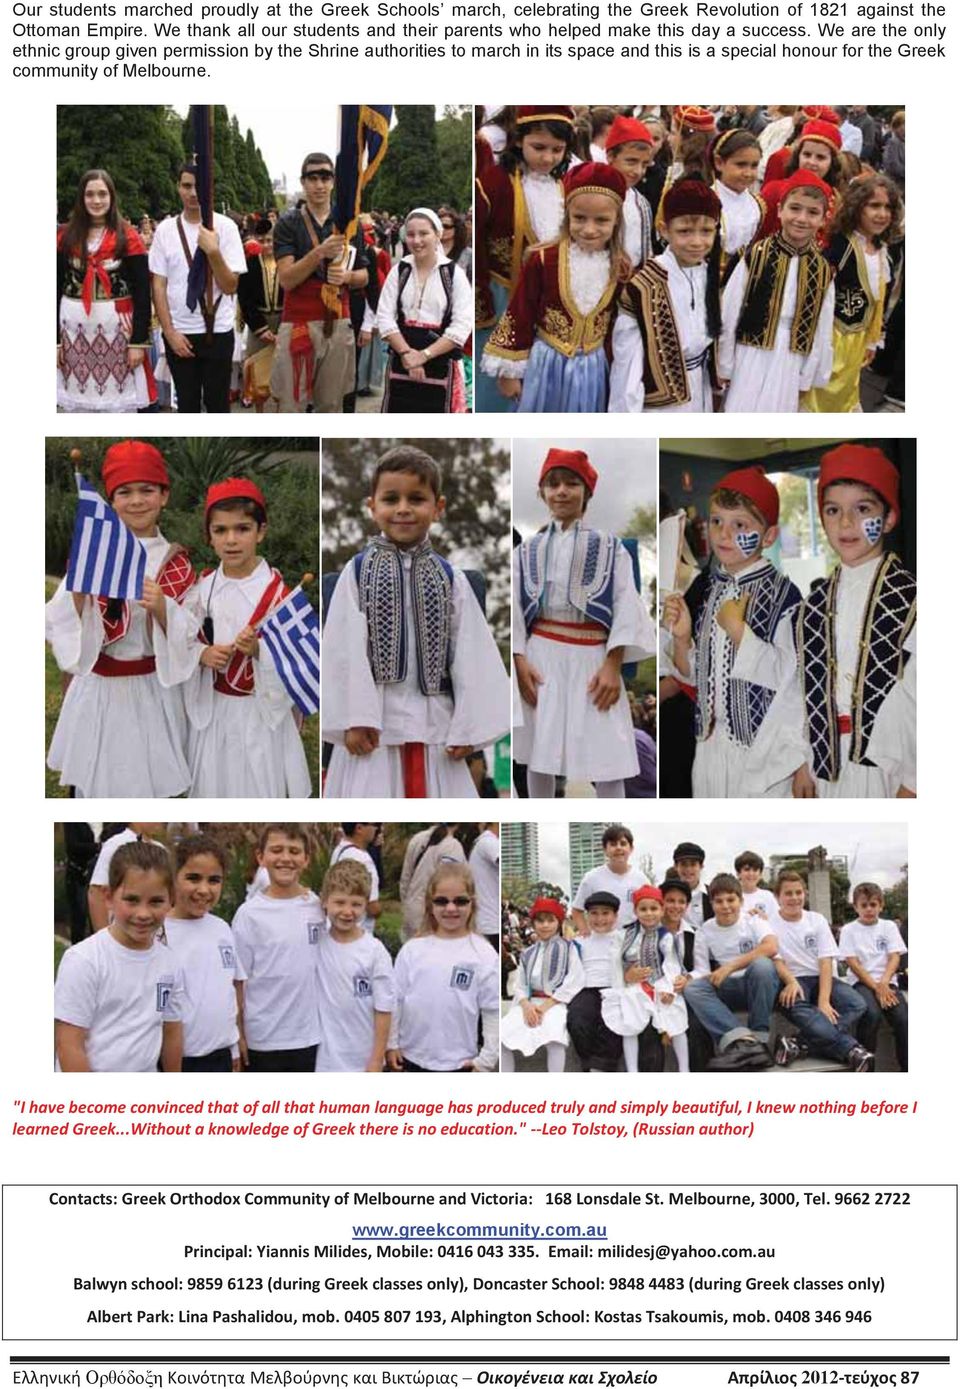 We are the only ethnic group given permission by the Shrine authorities to march in its space and this is a special honour for the Greek community of Melbourne.